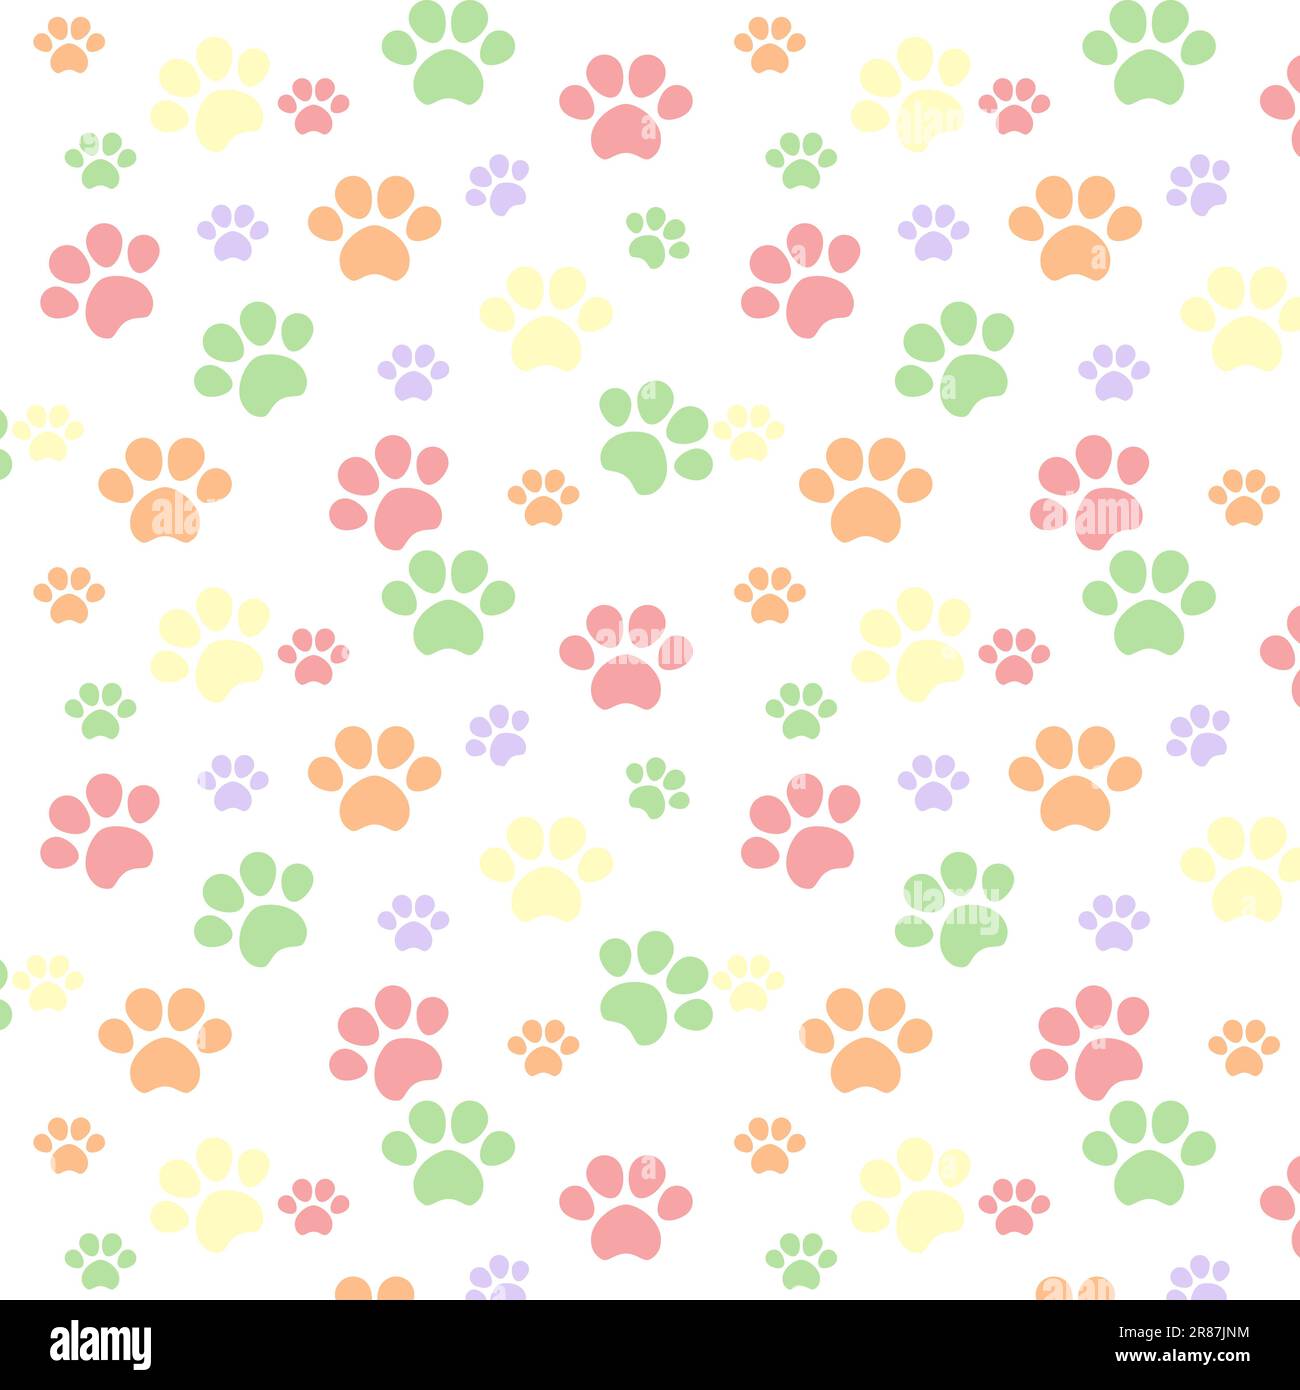 Colorful Animal Paw Prints Pattern. Pastel Colored Cute Pet Paws Background Texture Stock Vector